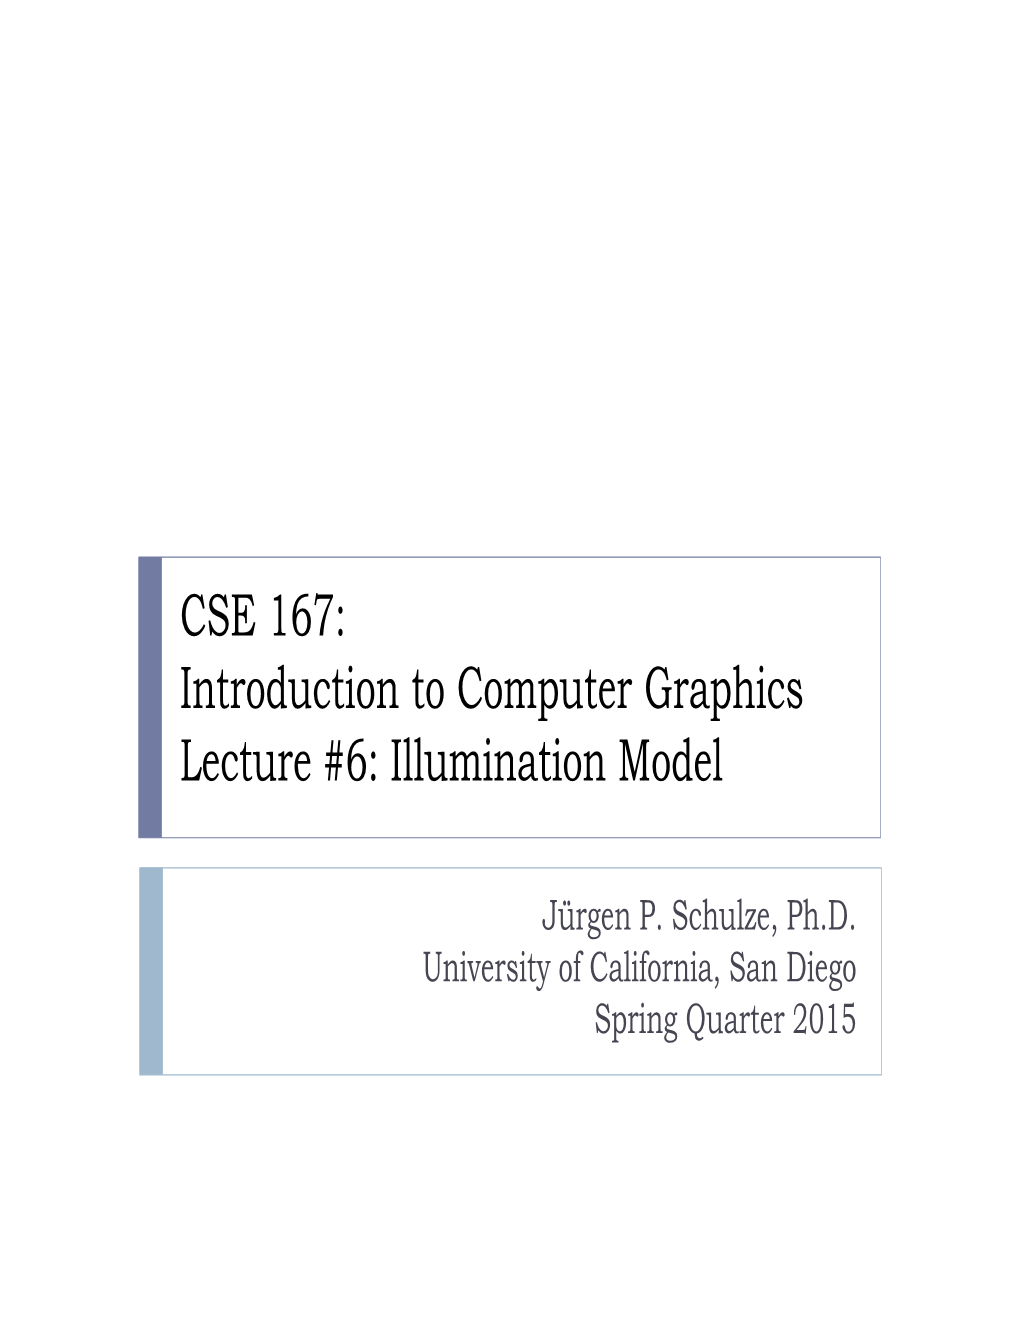 CSE 167: Introduction to Computer Graphics Lecture #6: Illumination Model